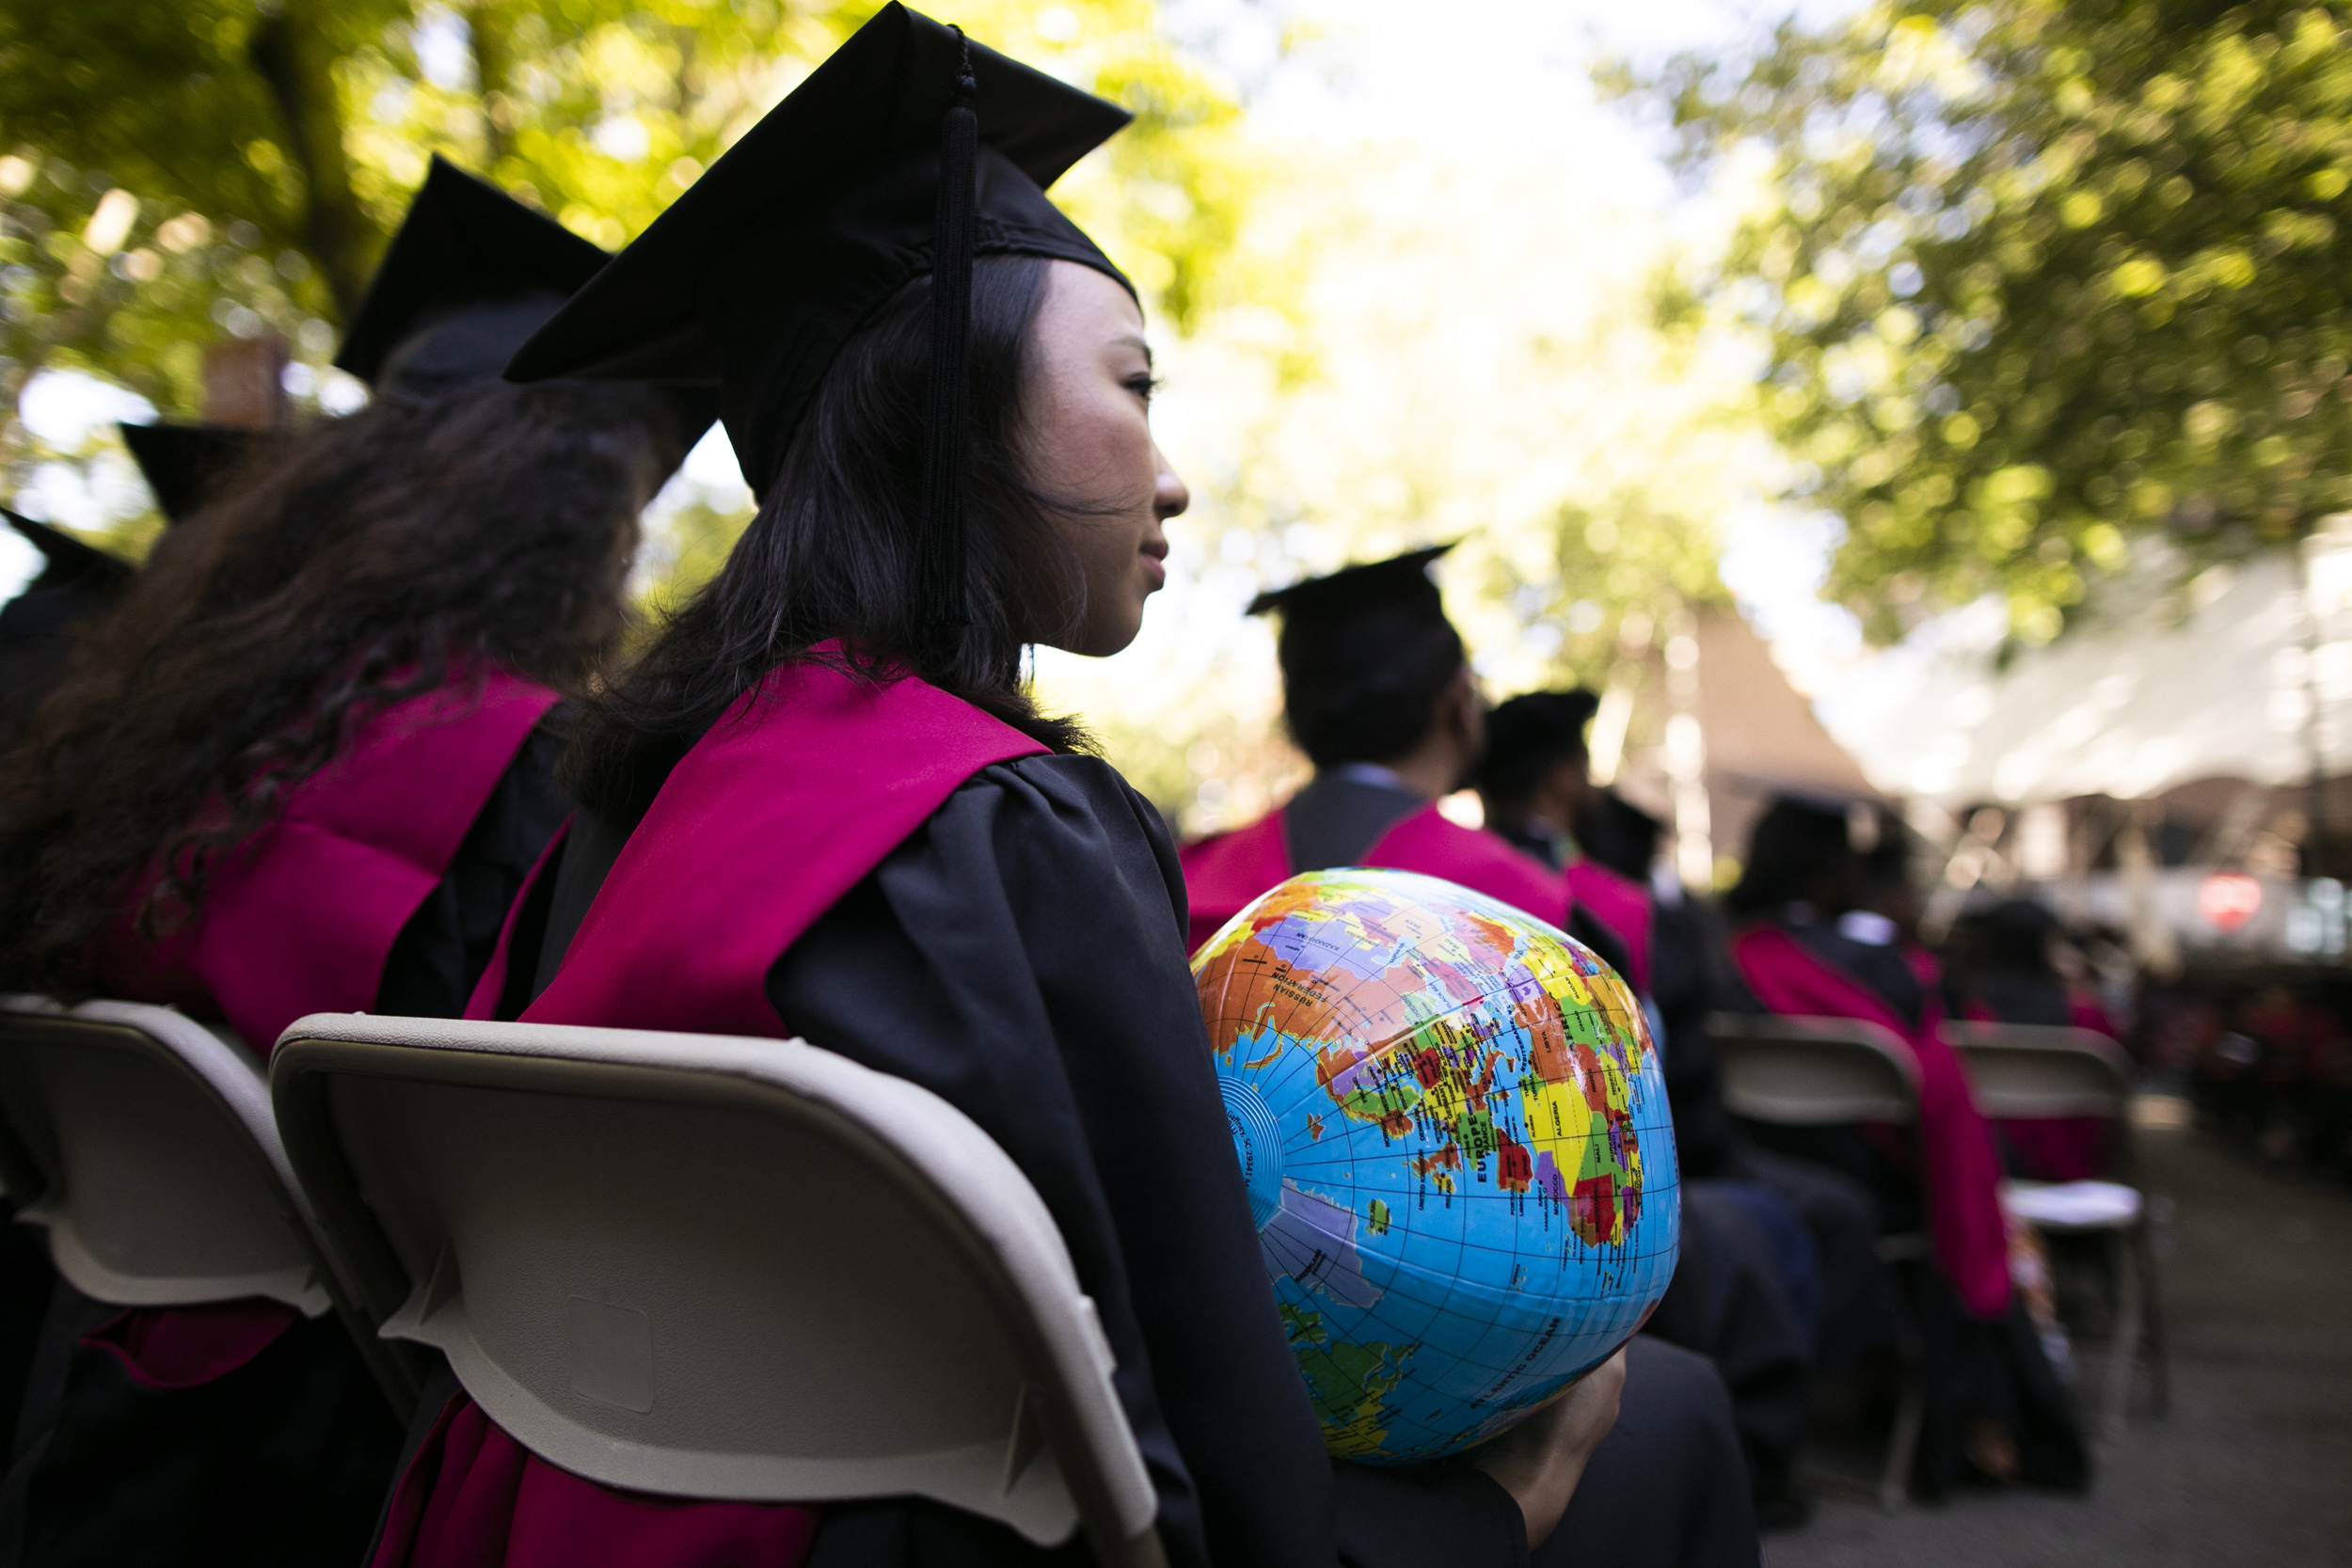 Jane Tjahjono HKS '20 is pictured holding a globe during the ceremony.